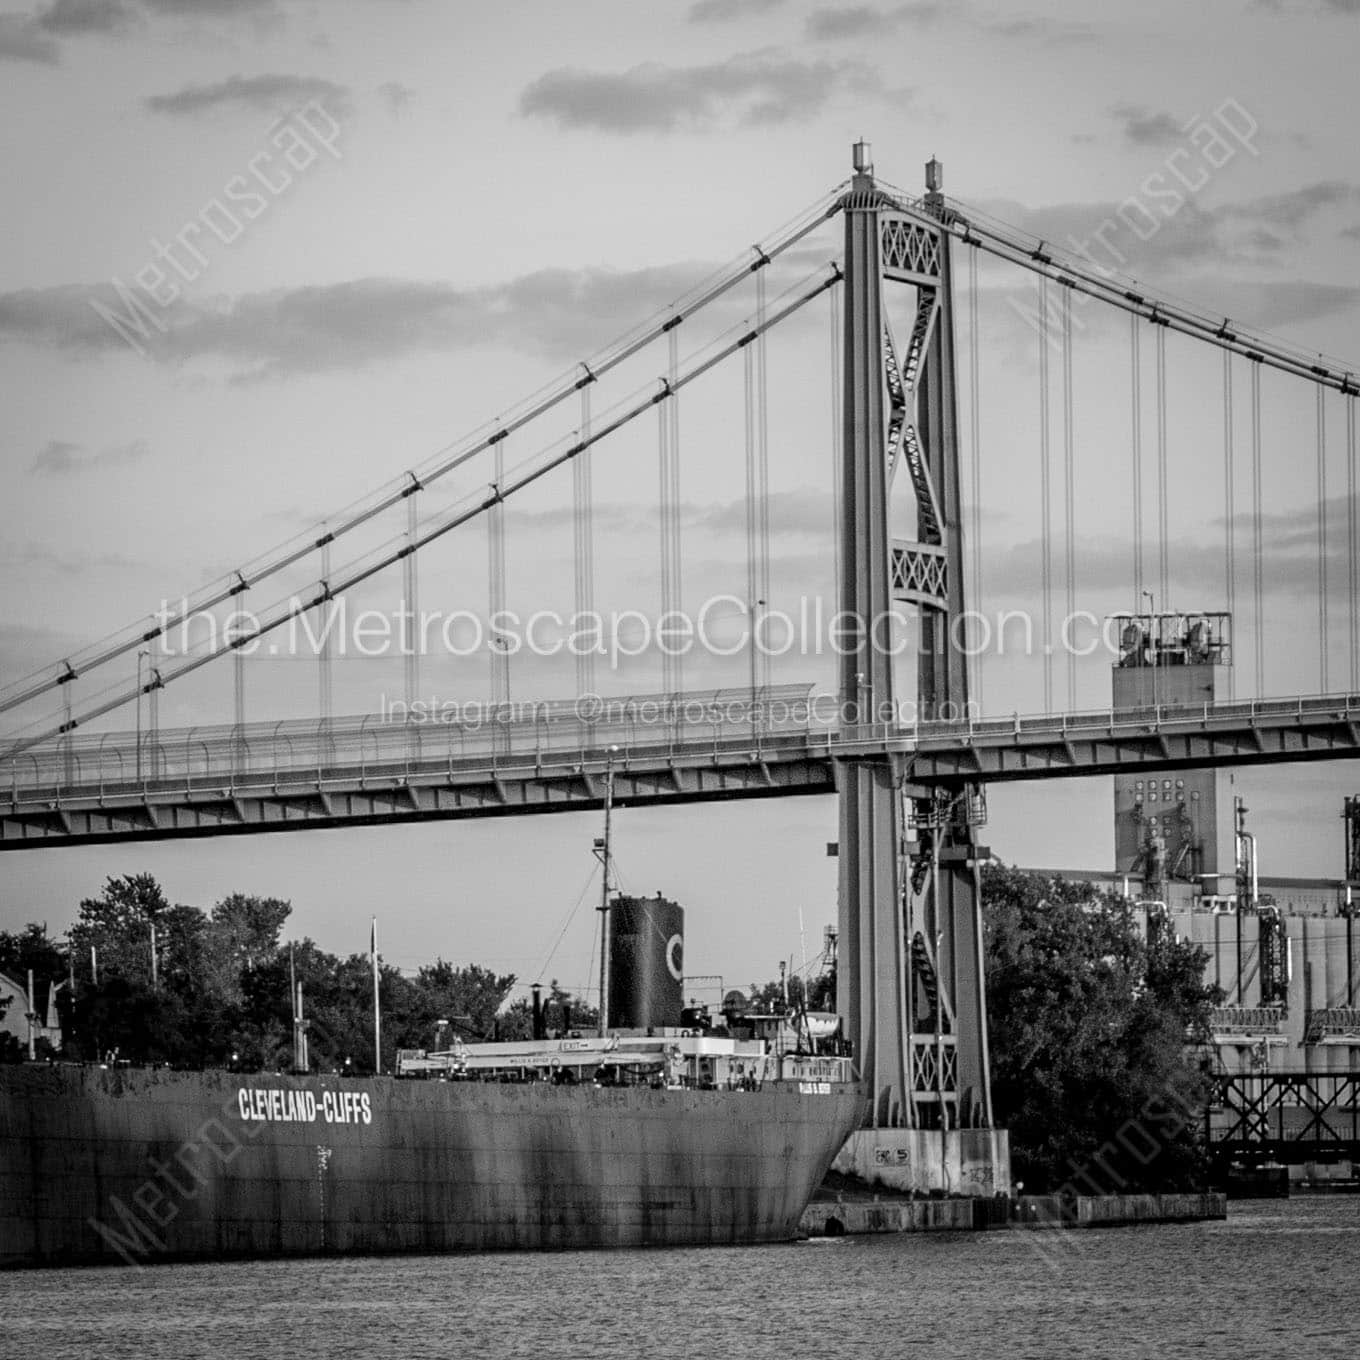 cleveland cliffs barge maumee river Black & White Wall Art